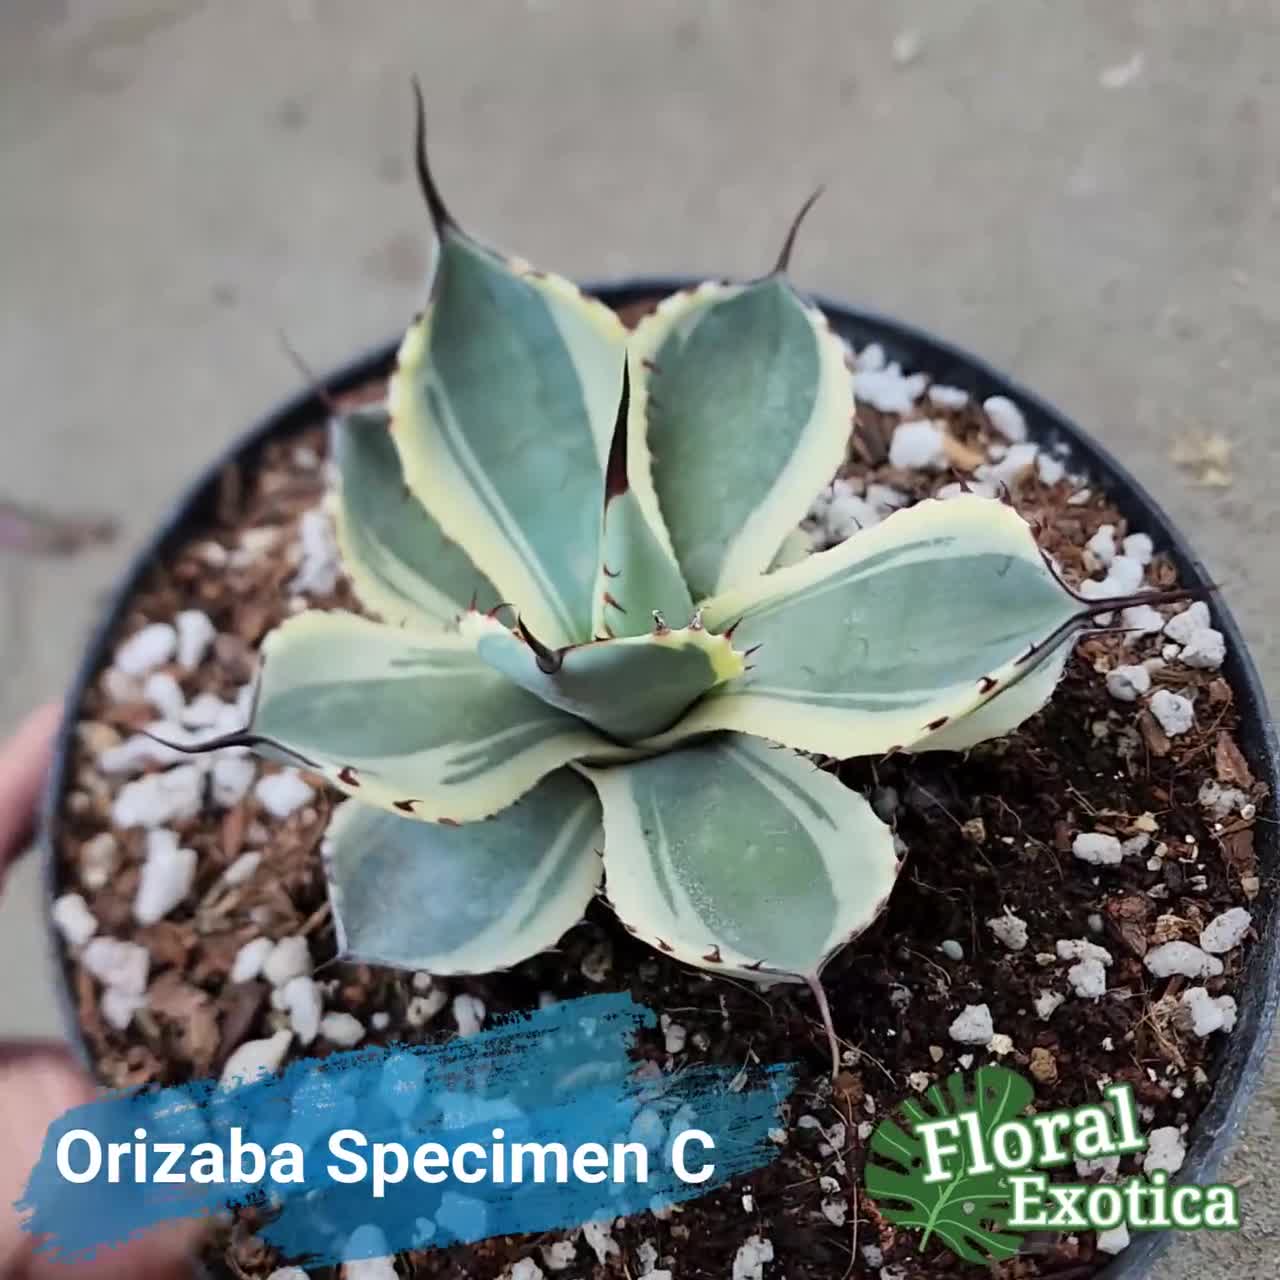 Agave Parryi Truncata 'Orizaba' - アガベ　パリー トランカタ オリザバ 希少植物 - Rare Specimen -  龍舌蘭専門店 - Specialty Agave Shop - US Stock - 植物検疫証明書付きで出荷